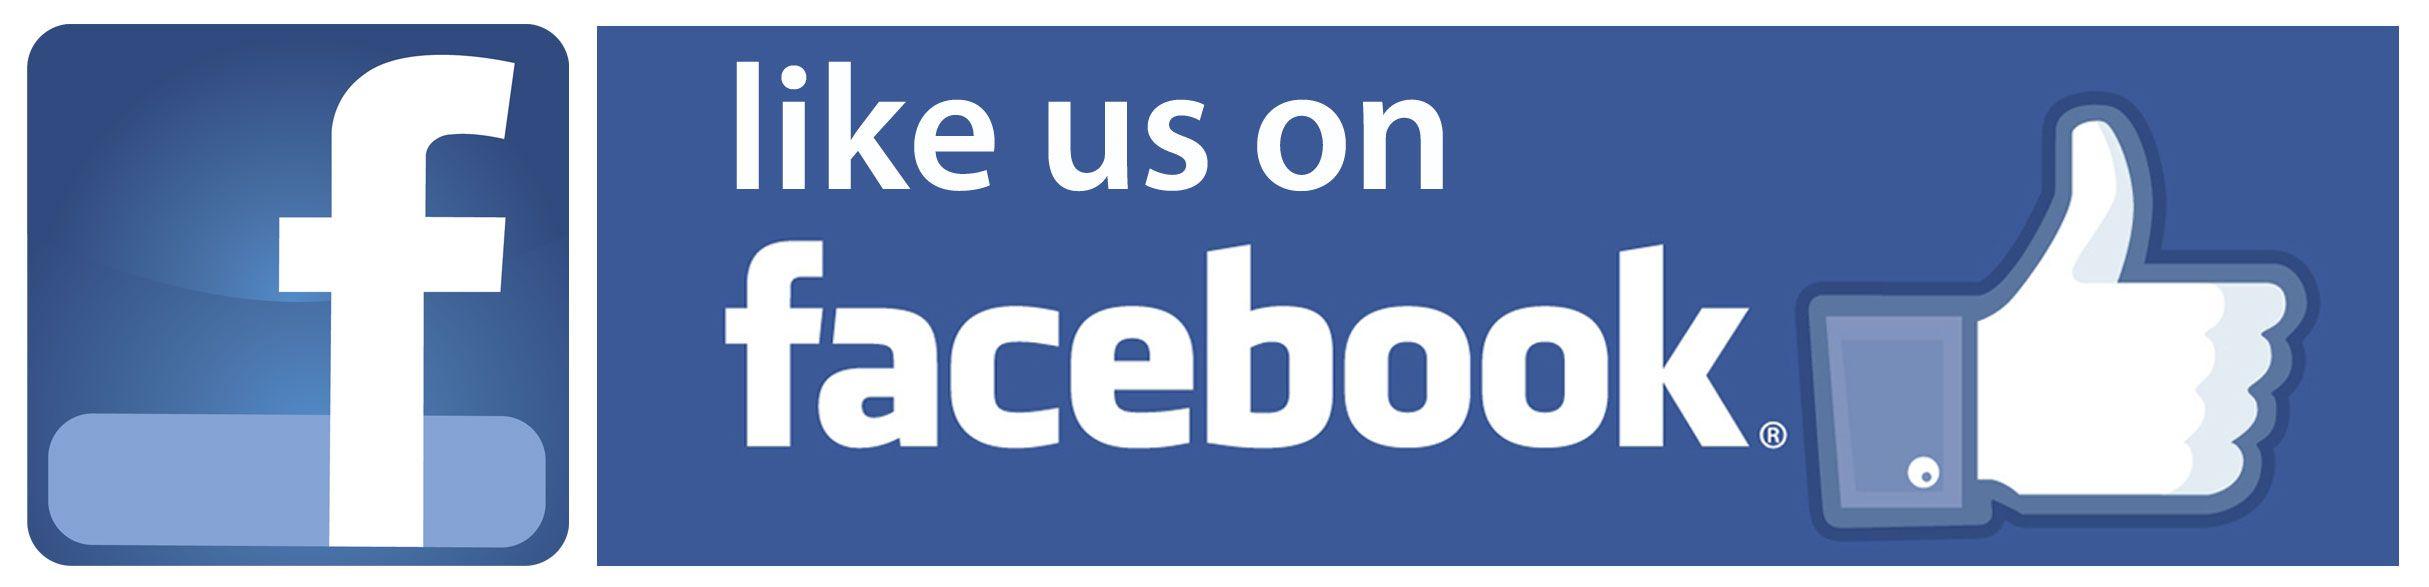 Follow Us On Facebook Logo - Facebook Logo Transparent PNG Pictures - Free Icons and PNG Backgrounds